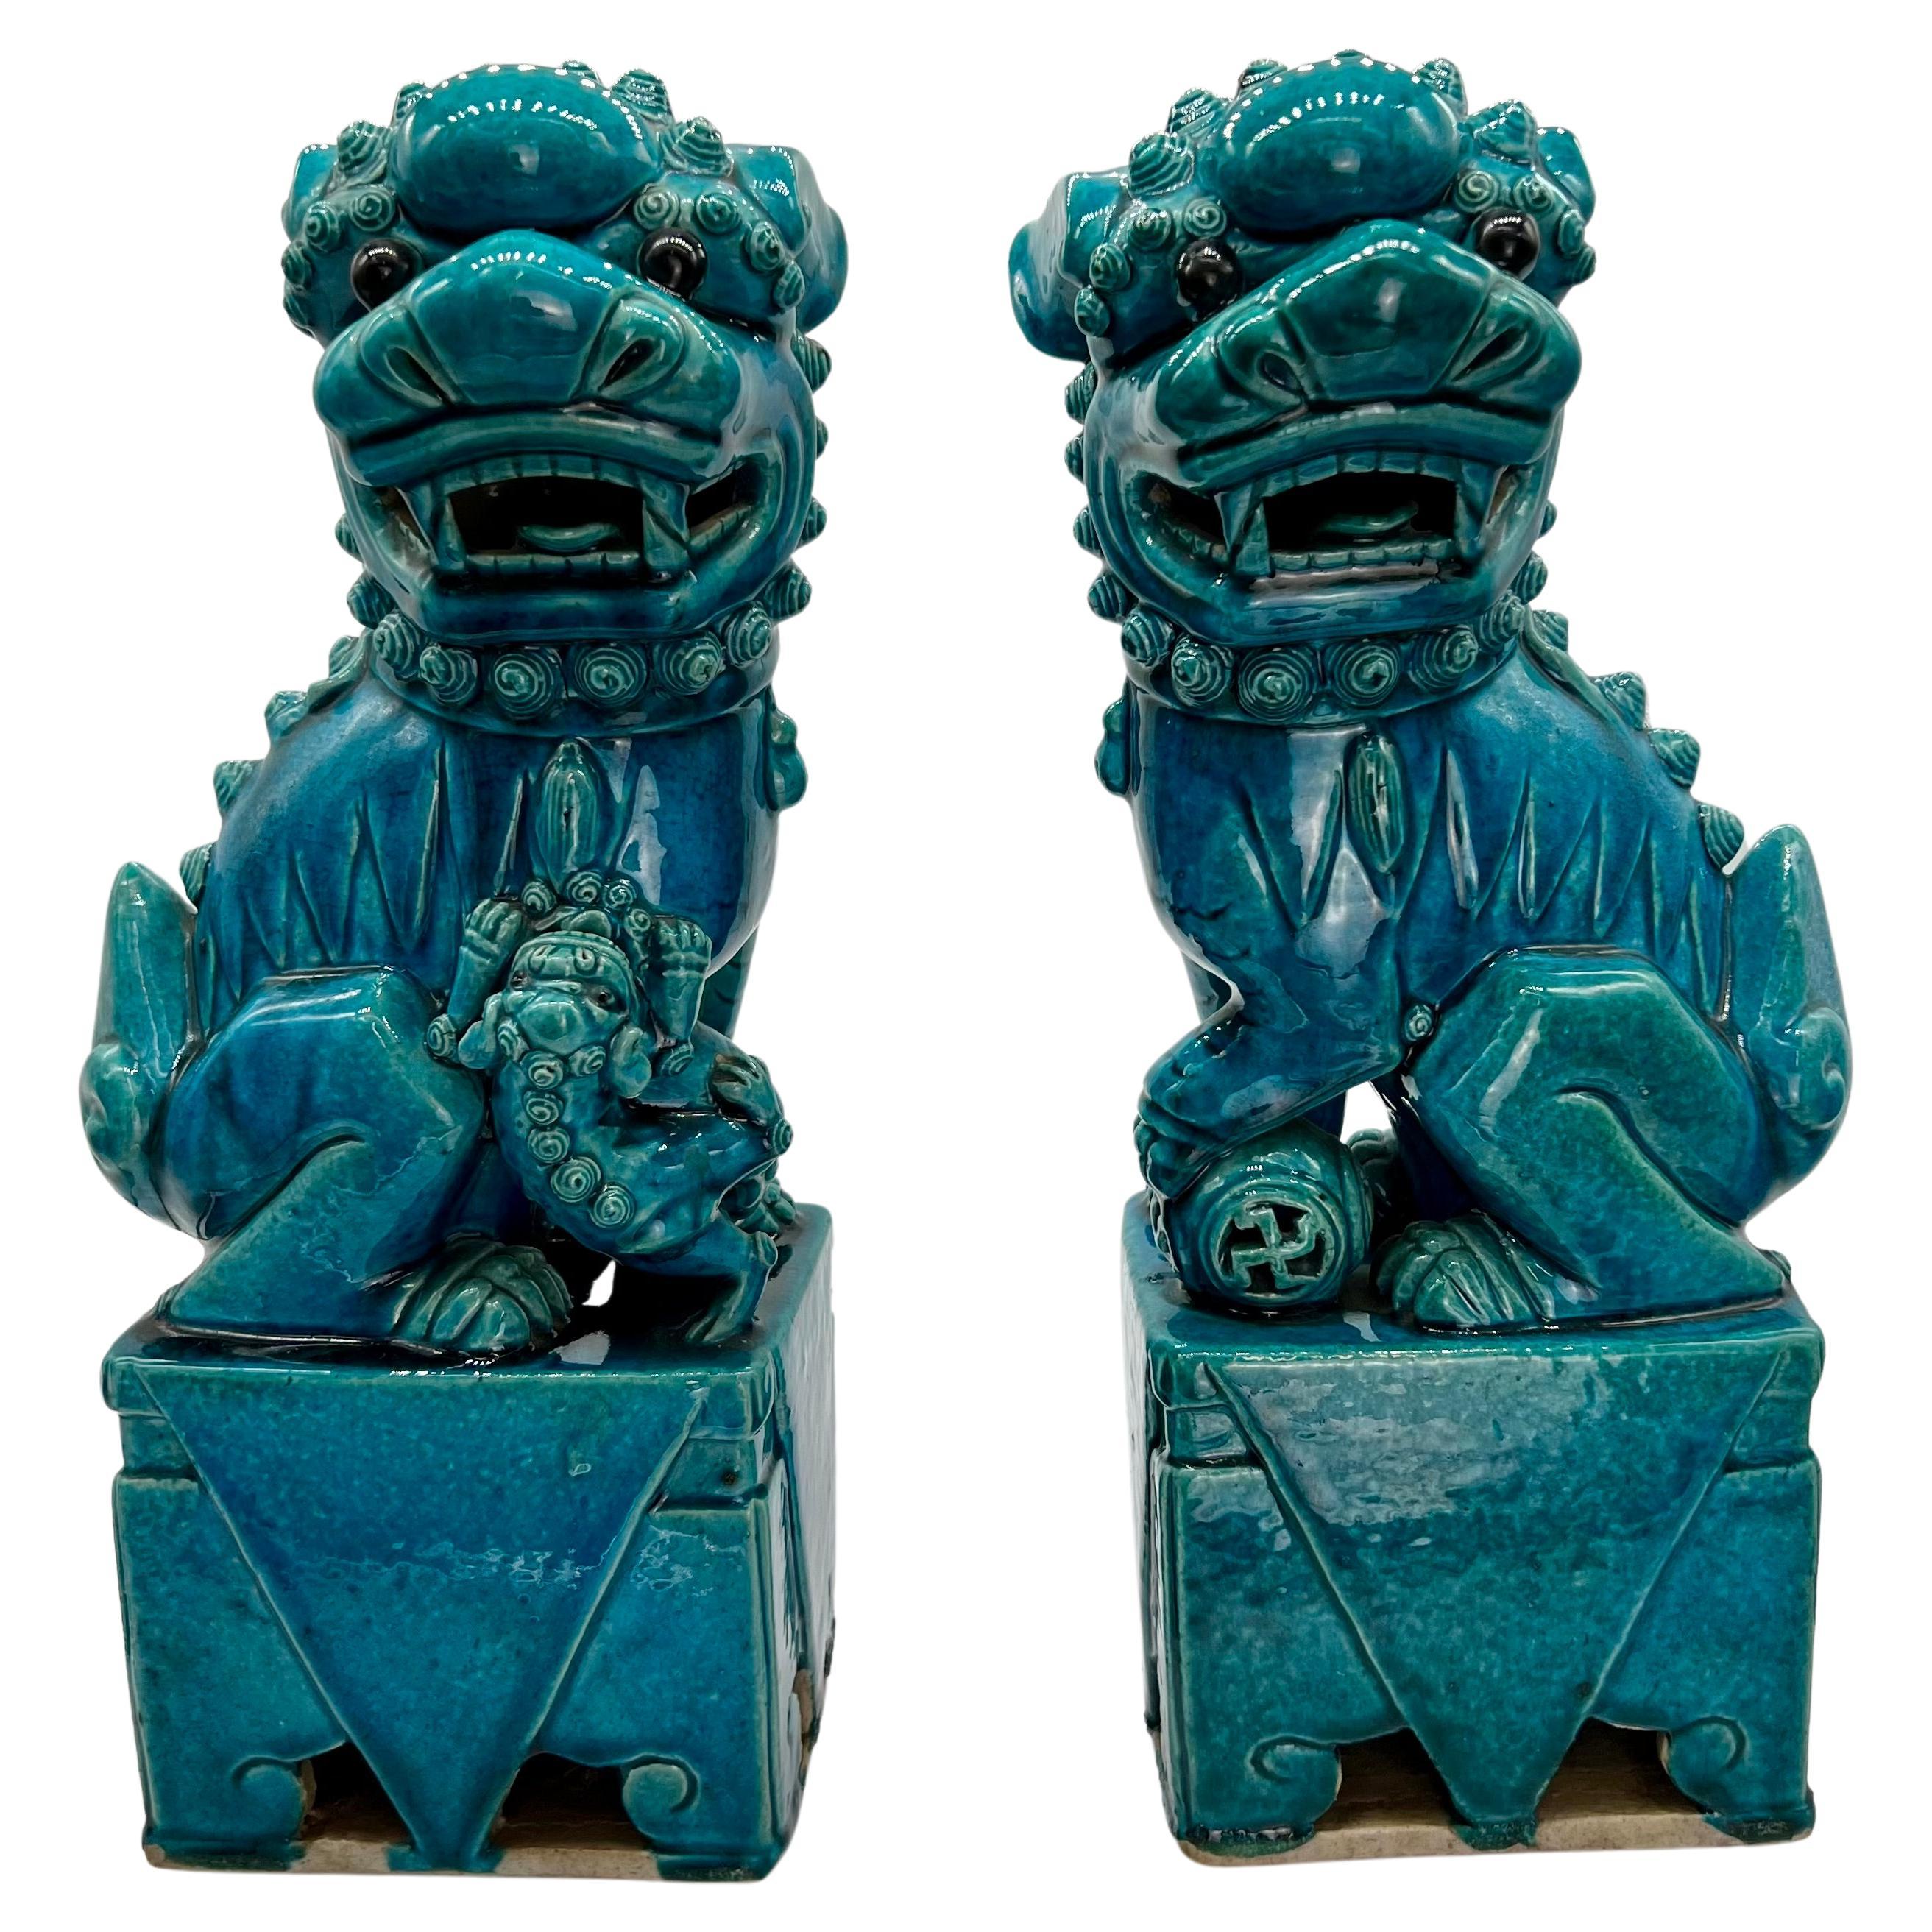 Pair of Chinese Turquoise Glazed Foo Dogs, circa 1880